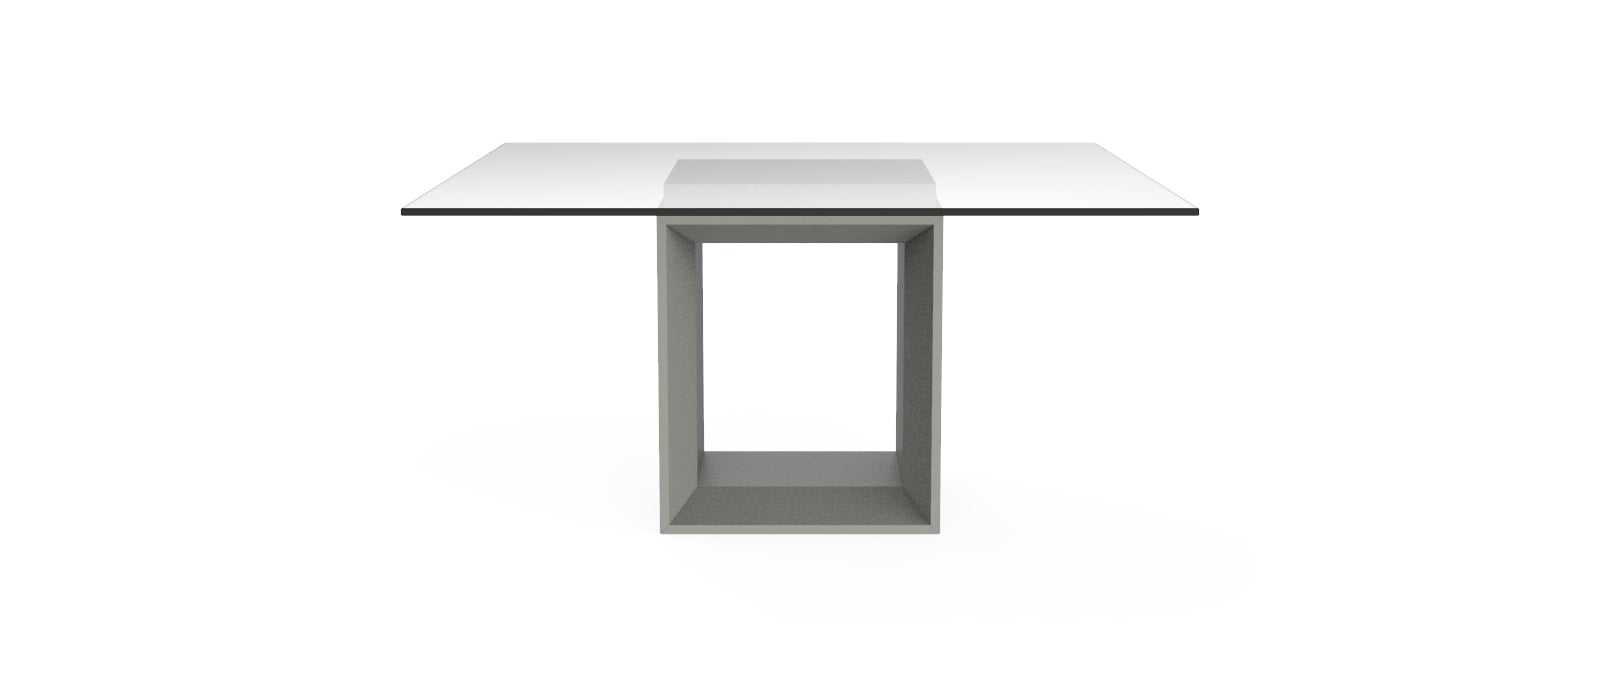 Nutelli Square Dining Table